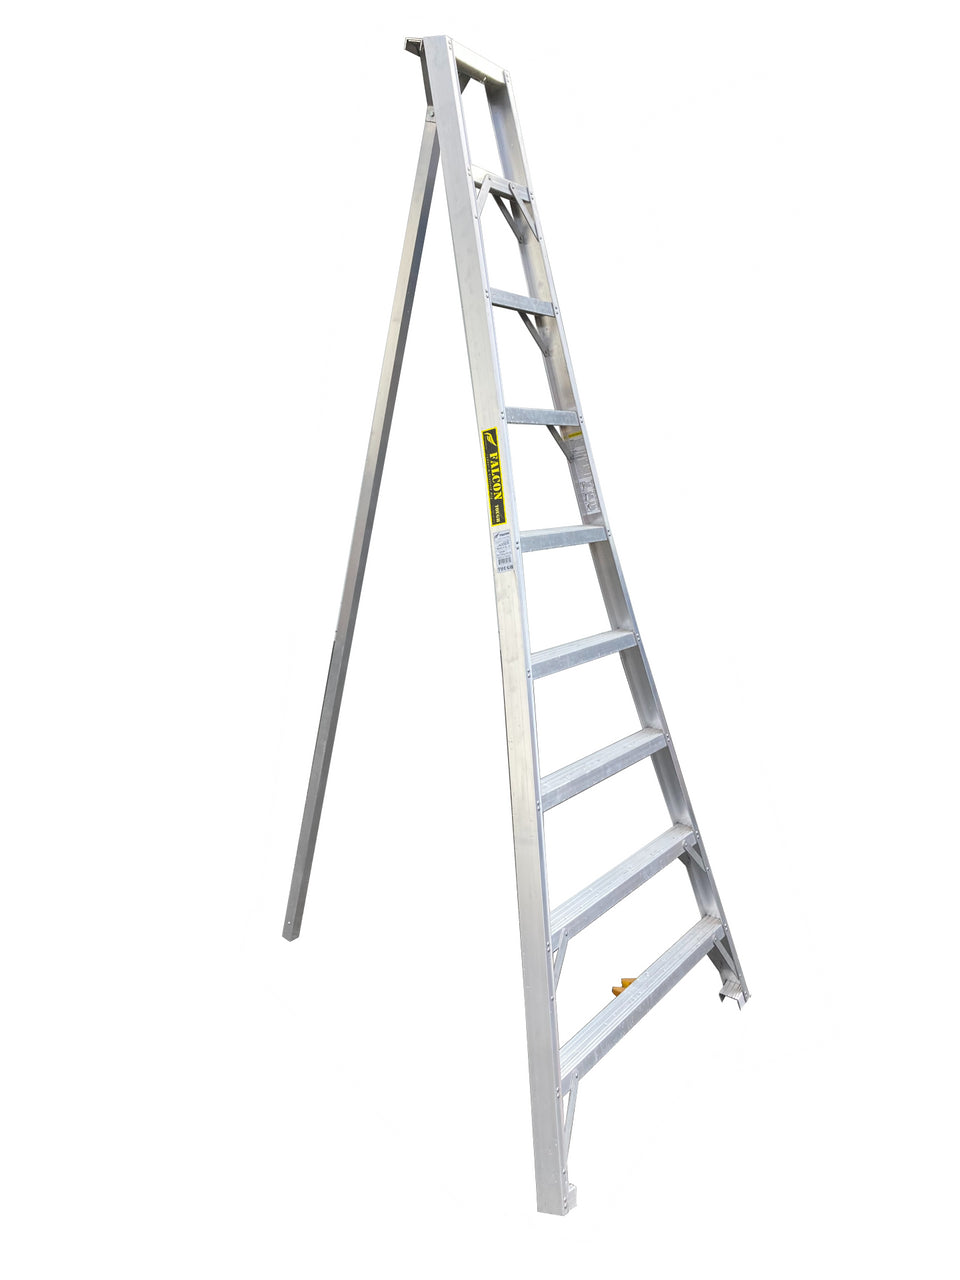 Falcon Aluminum Orchard Picking Ladder - various sizes